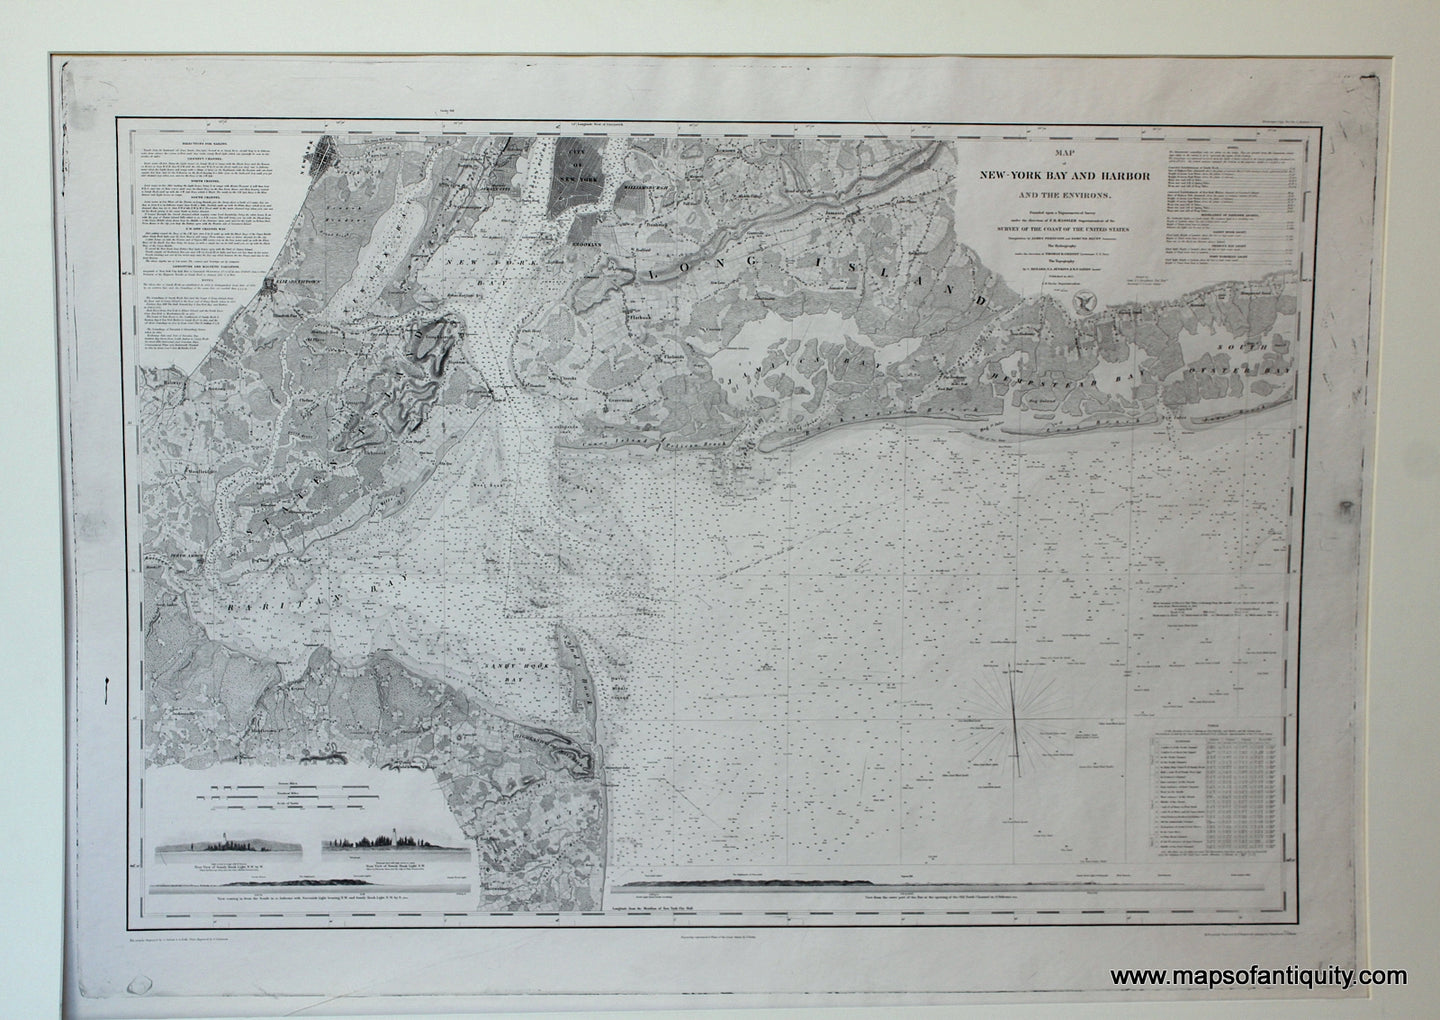 Black-and-White-Antique-Coastal-Chart-Map-of-New-York-Bay-and-Harbor-and-the-Environs.-**********-United-States-Northeast-1845-U.S.-Coast-Survey-Maps-Of-Antiquity